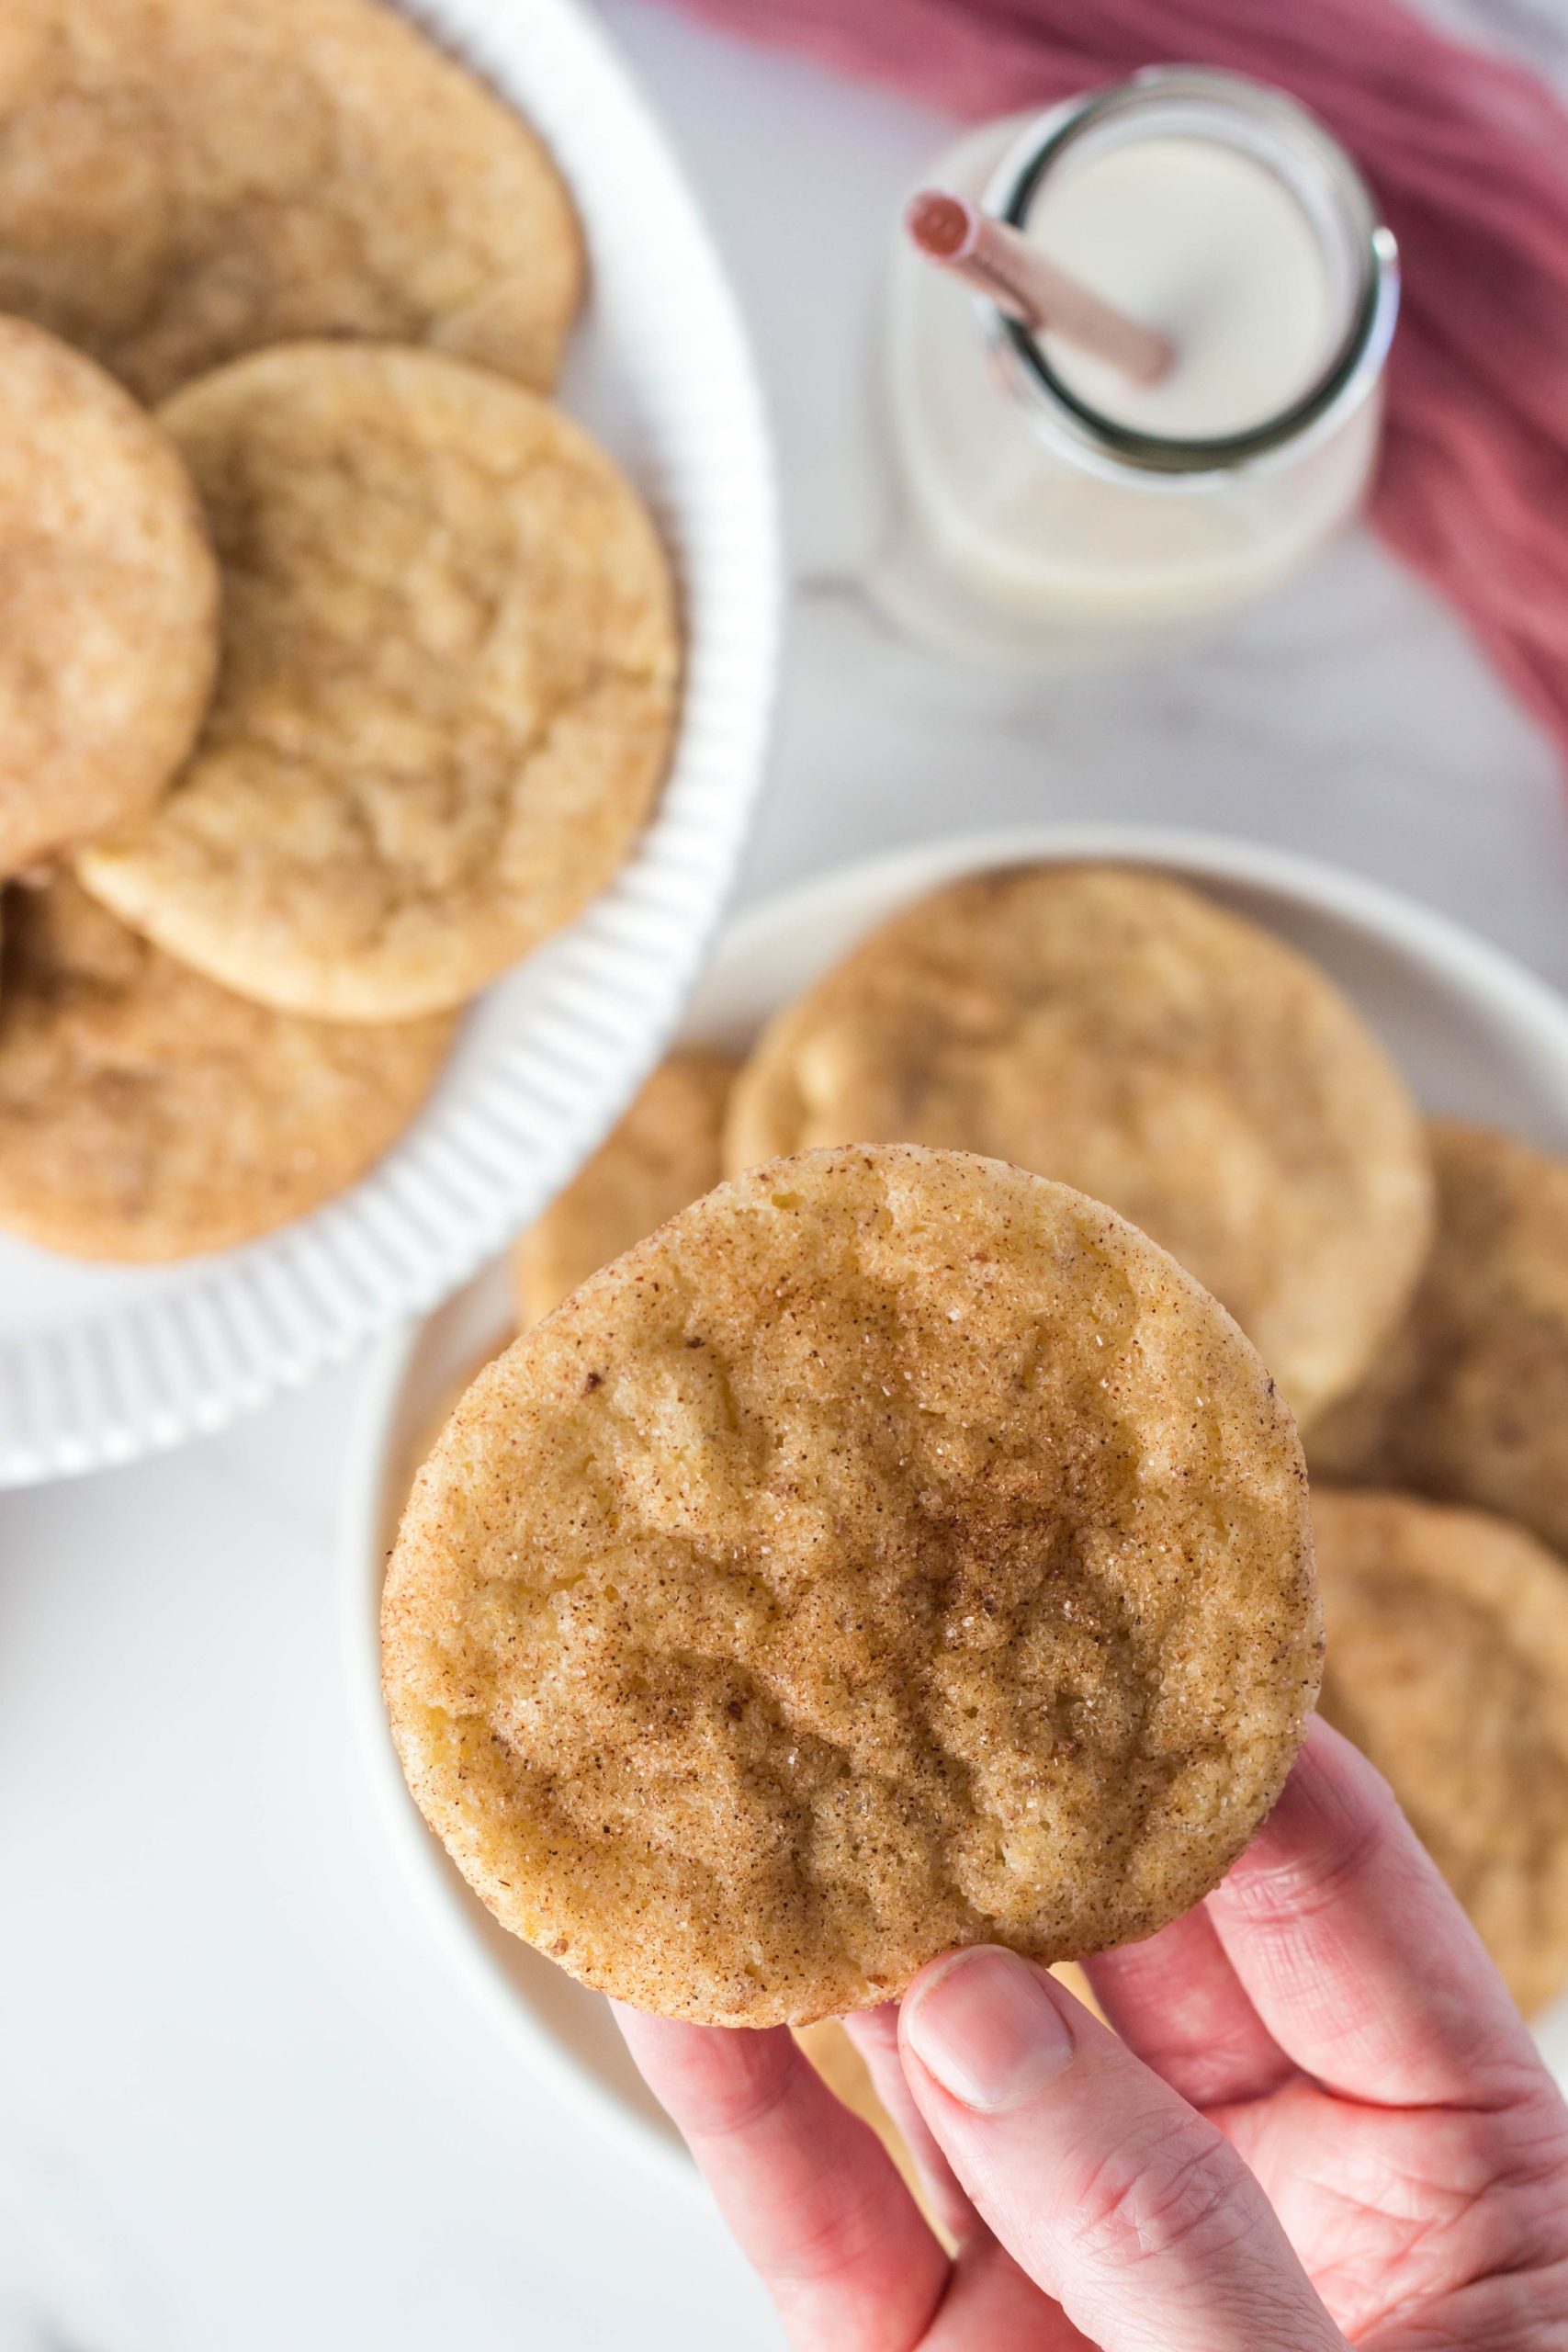 Melt in your mouth vegan snickerdoodle cookies. This easy-to-make vegan snickerdoodle cookies recipe tastes like the original. Get ready to try the best vegan snickerdoodle recipe ever!